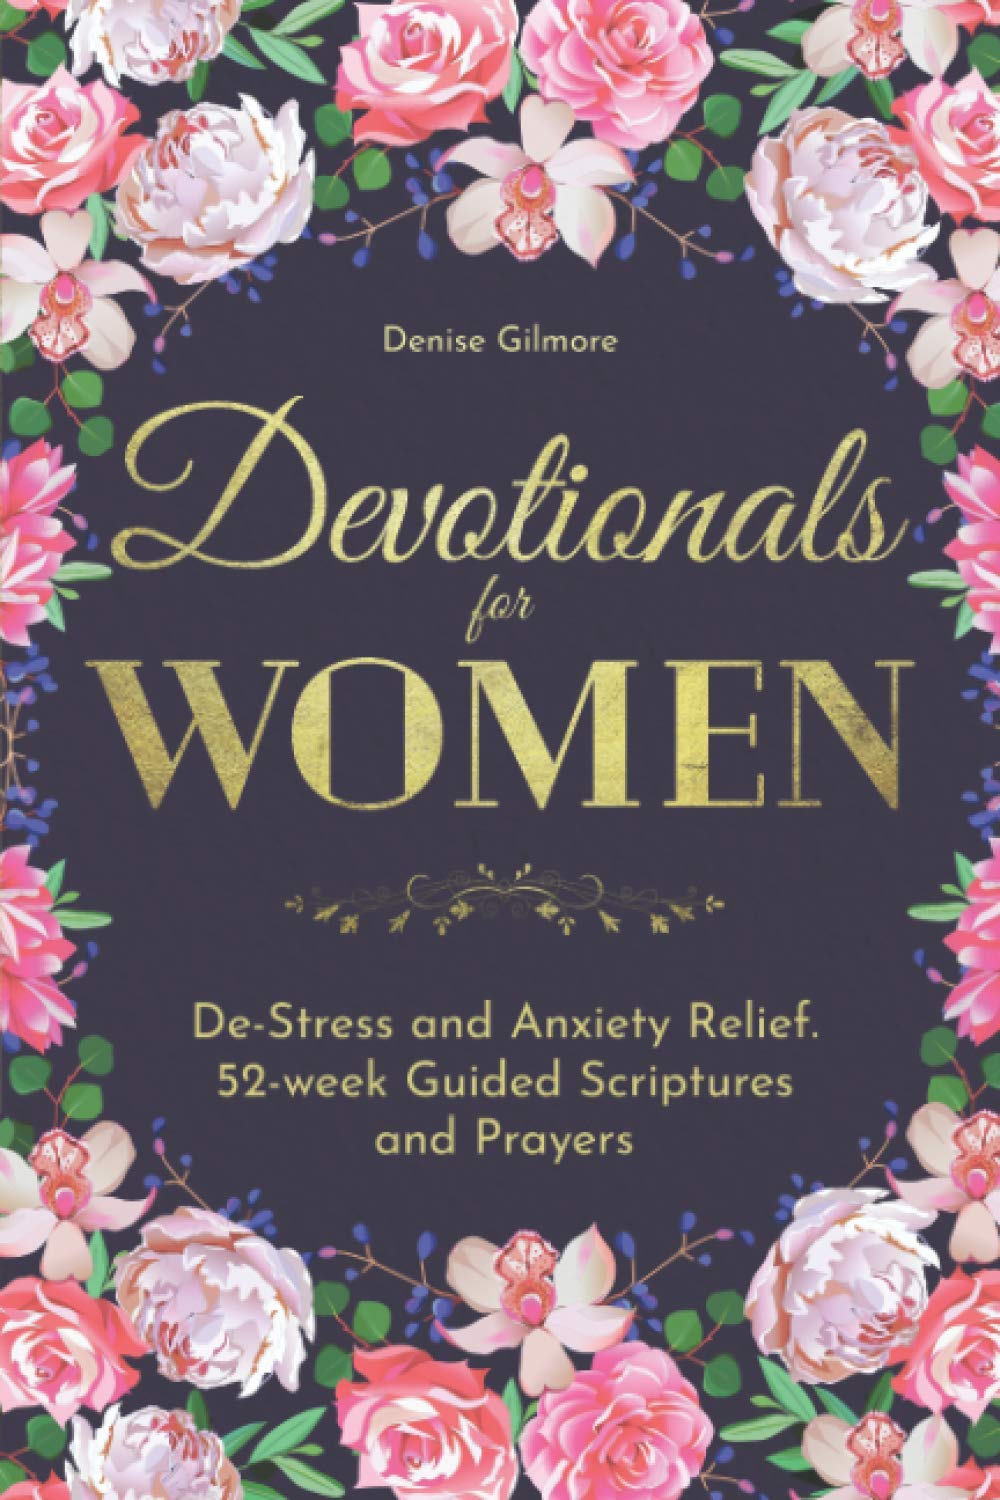 Devotionals for Women: De-Stress and Anxiety Relief. 52-week Guided Scriptures and Prayers (Selection of Devotionals for Women)